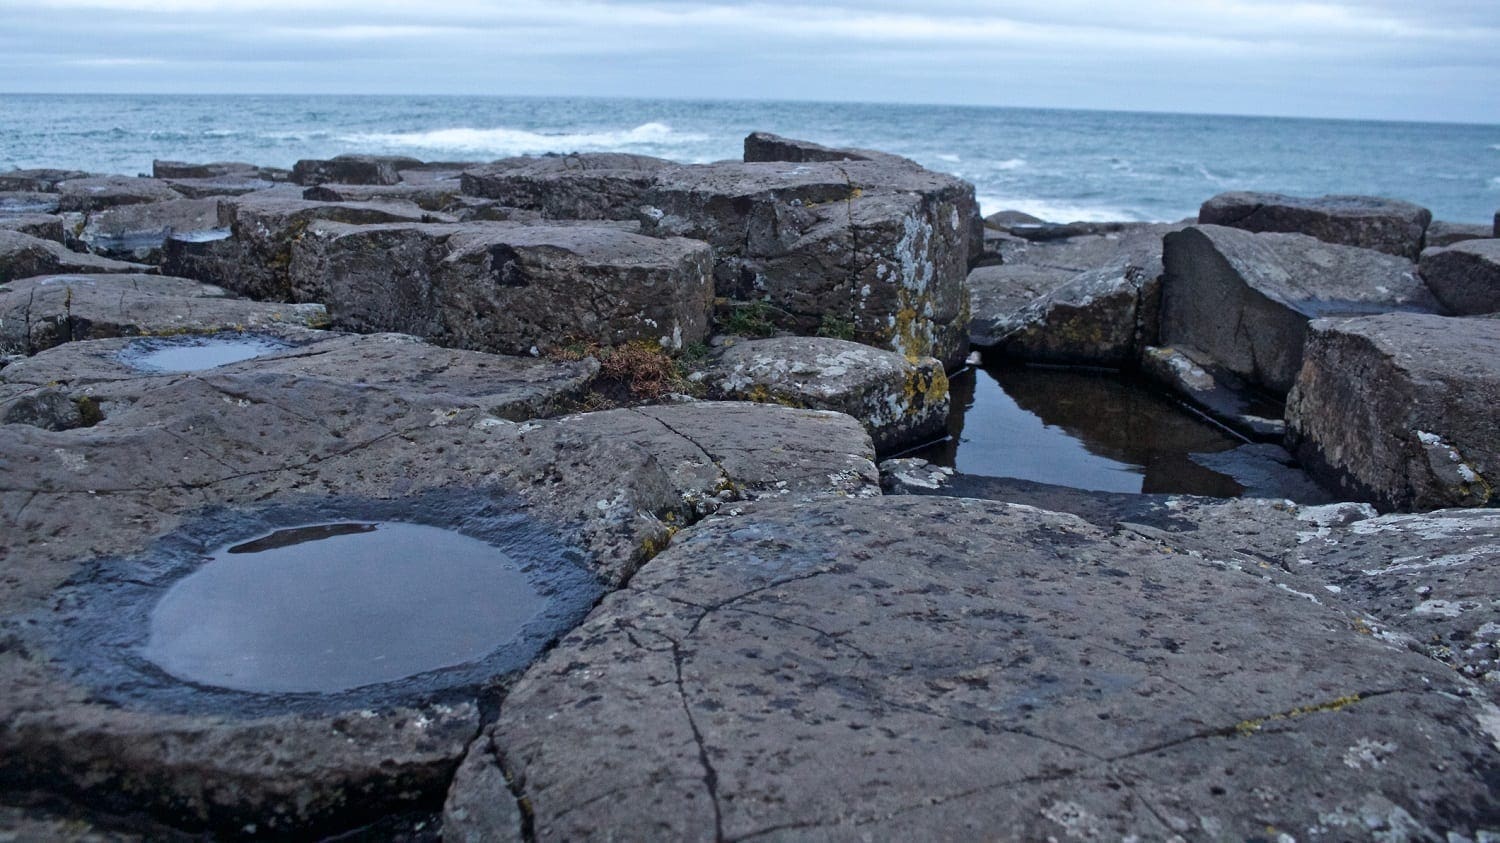 Giants Causeway with Puddles: ID 150329619 © Dan Martin | Dreamstime.com